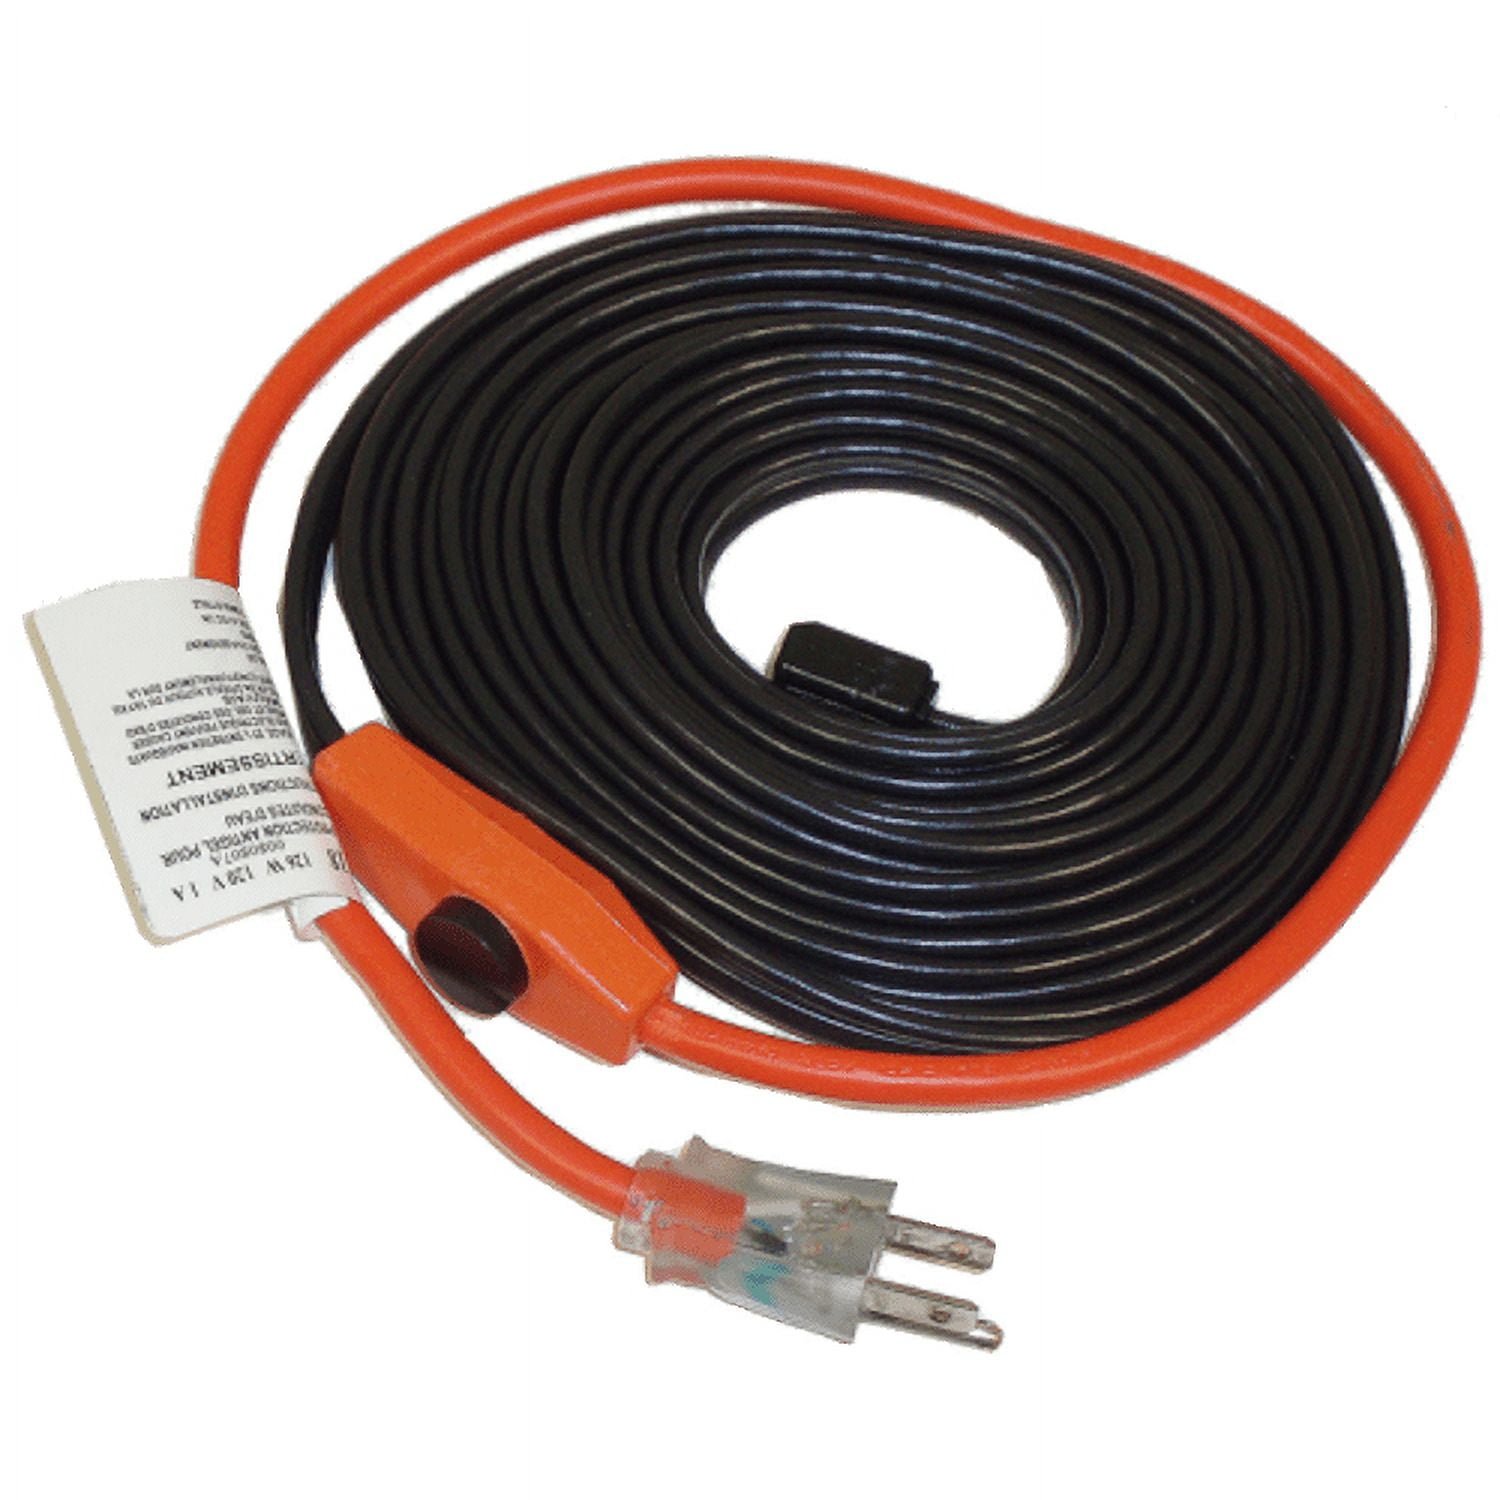 Thermwell Hc24 24 Ft. Automatic Electric Heat Cable Kit